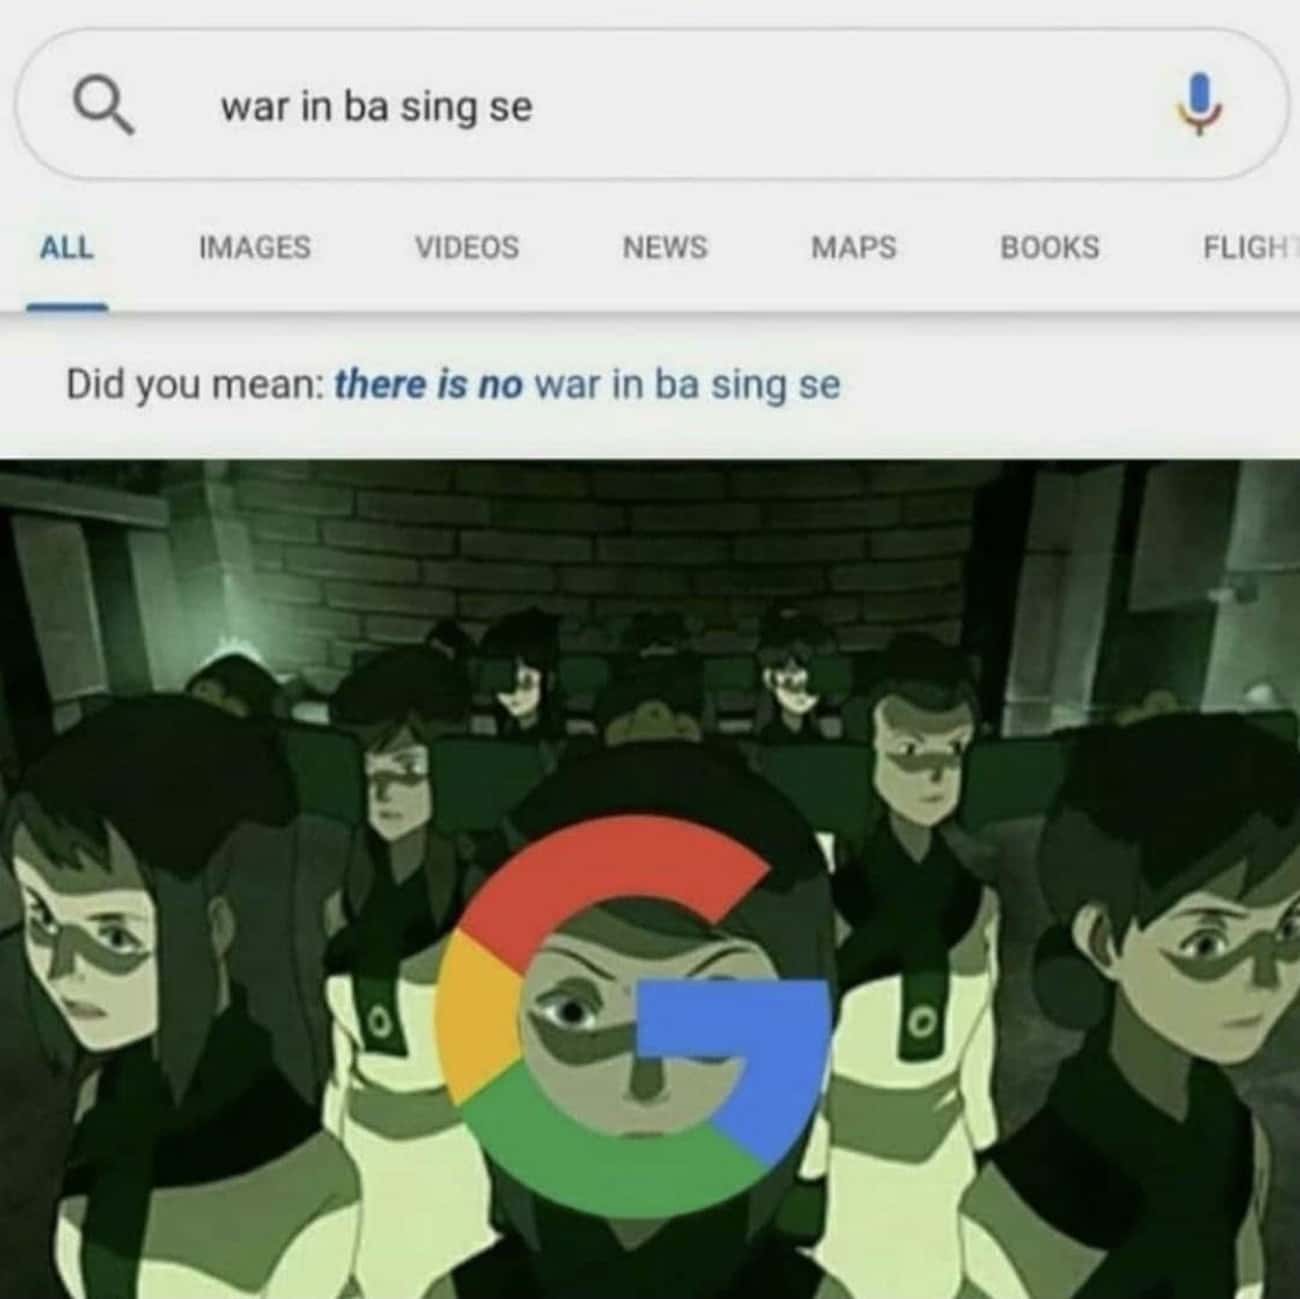 There Is No War In Ba Sing Se According To Google